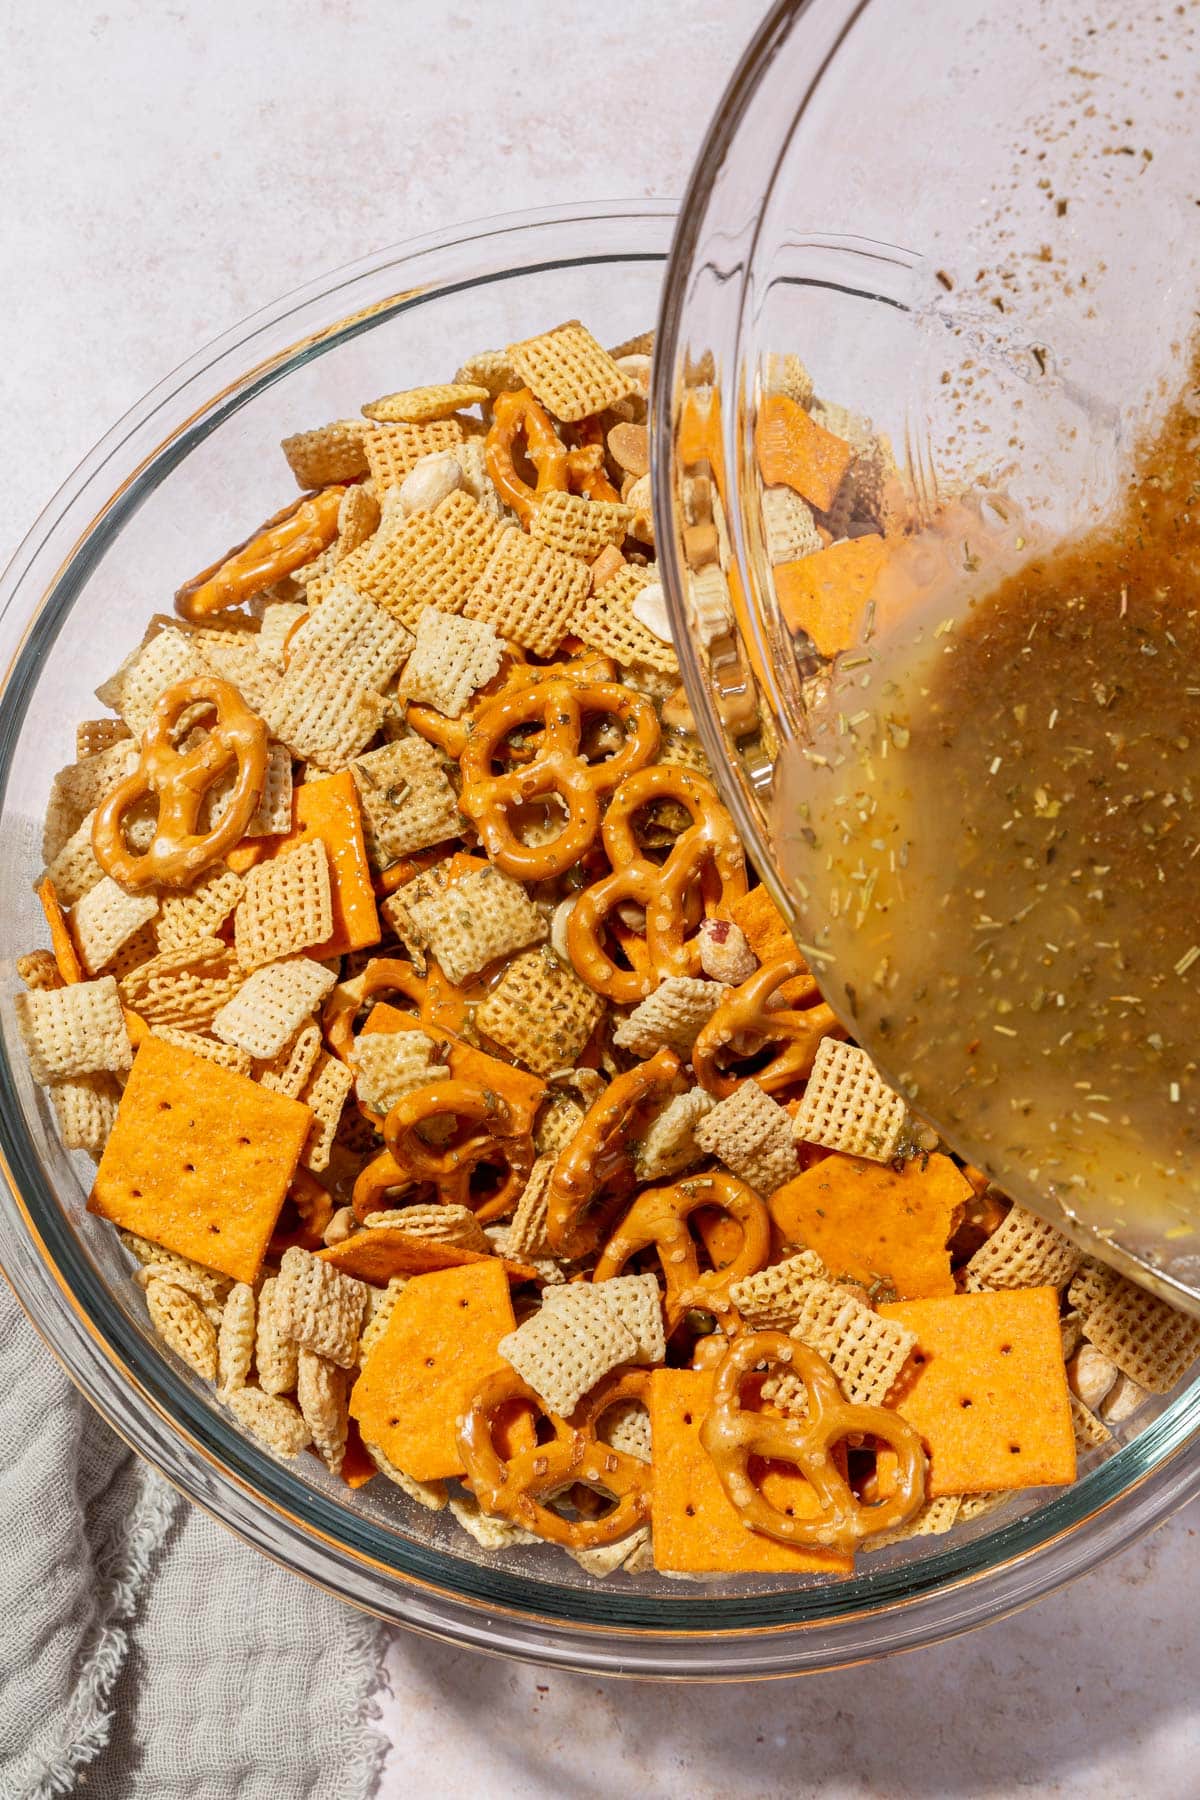 A bowl of melted butter and spice mixture being drizzled over gluten-free chex mix in a glass bowl.